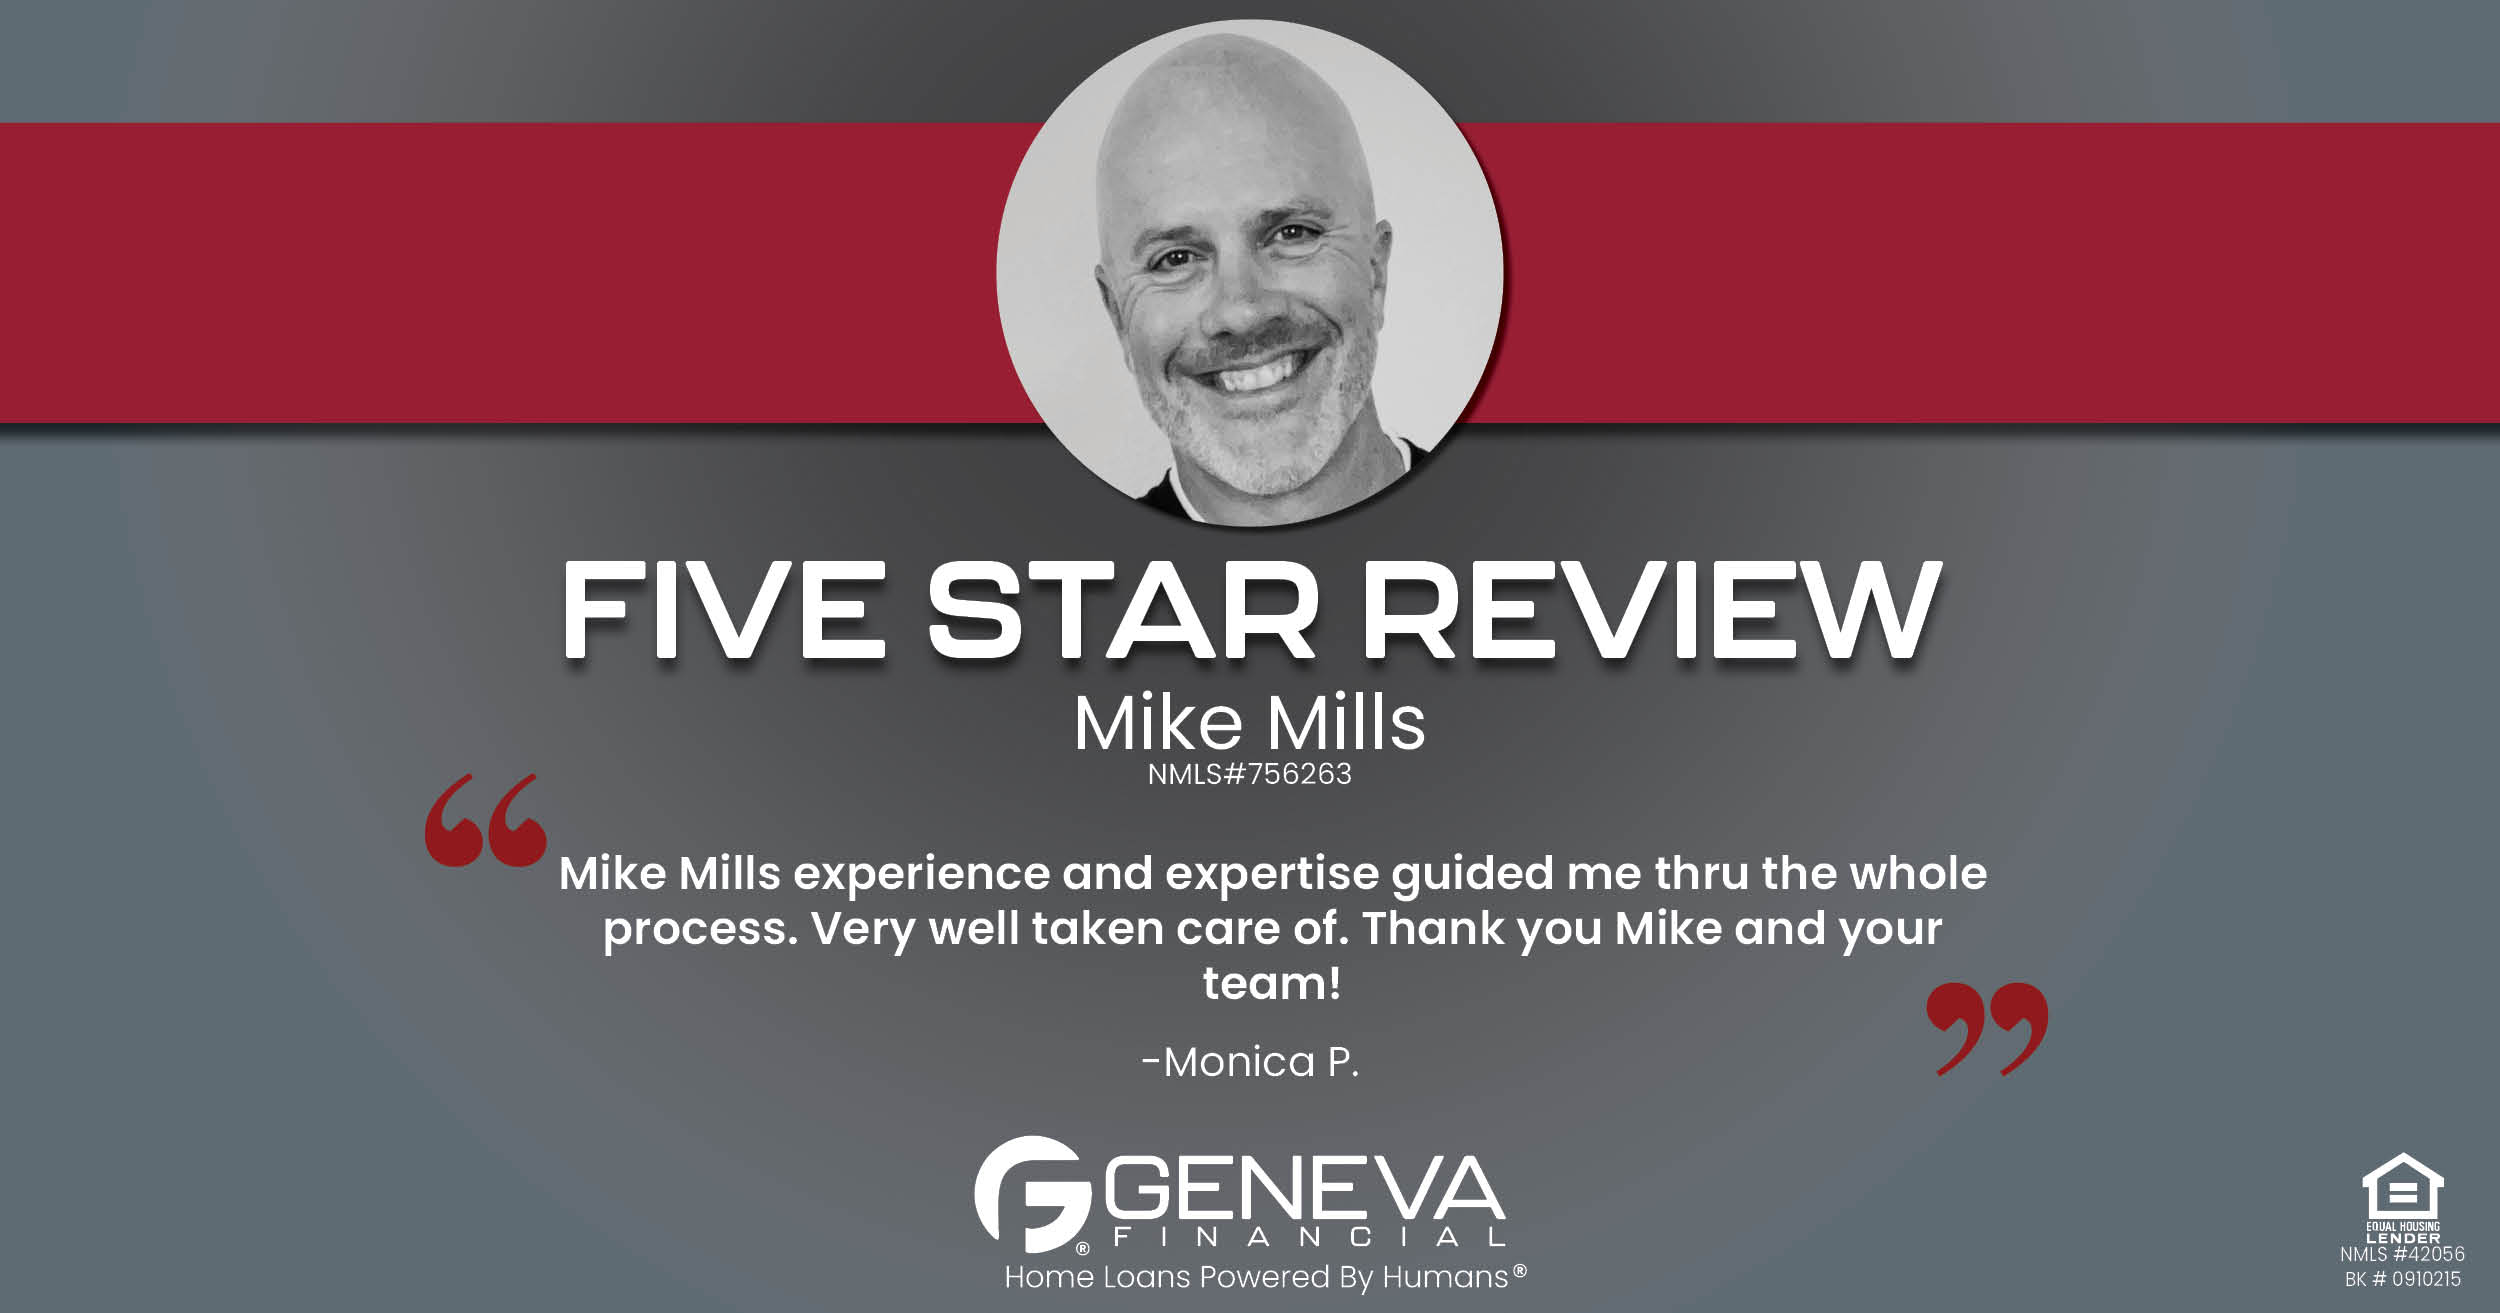 5 Star Review for Mike Mills, Licensed Mortgage Loan Officer with Geneva Financial, Mansfield, TX – Home Loans Powered by Humans®.